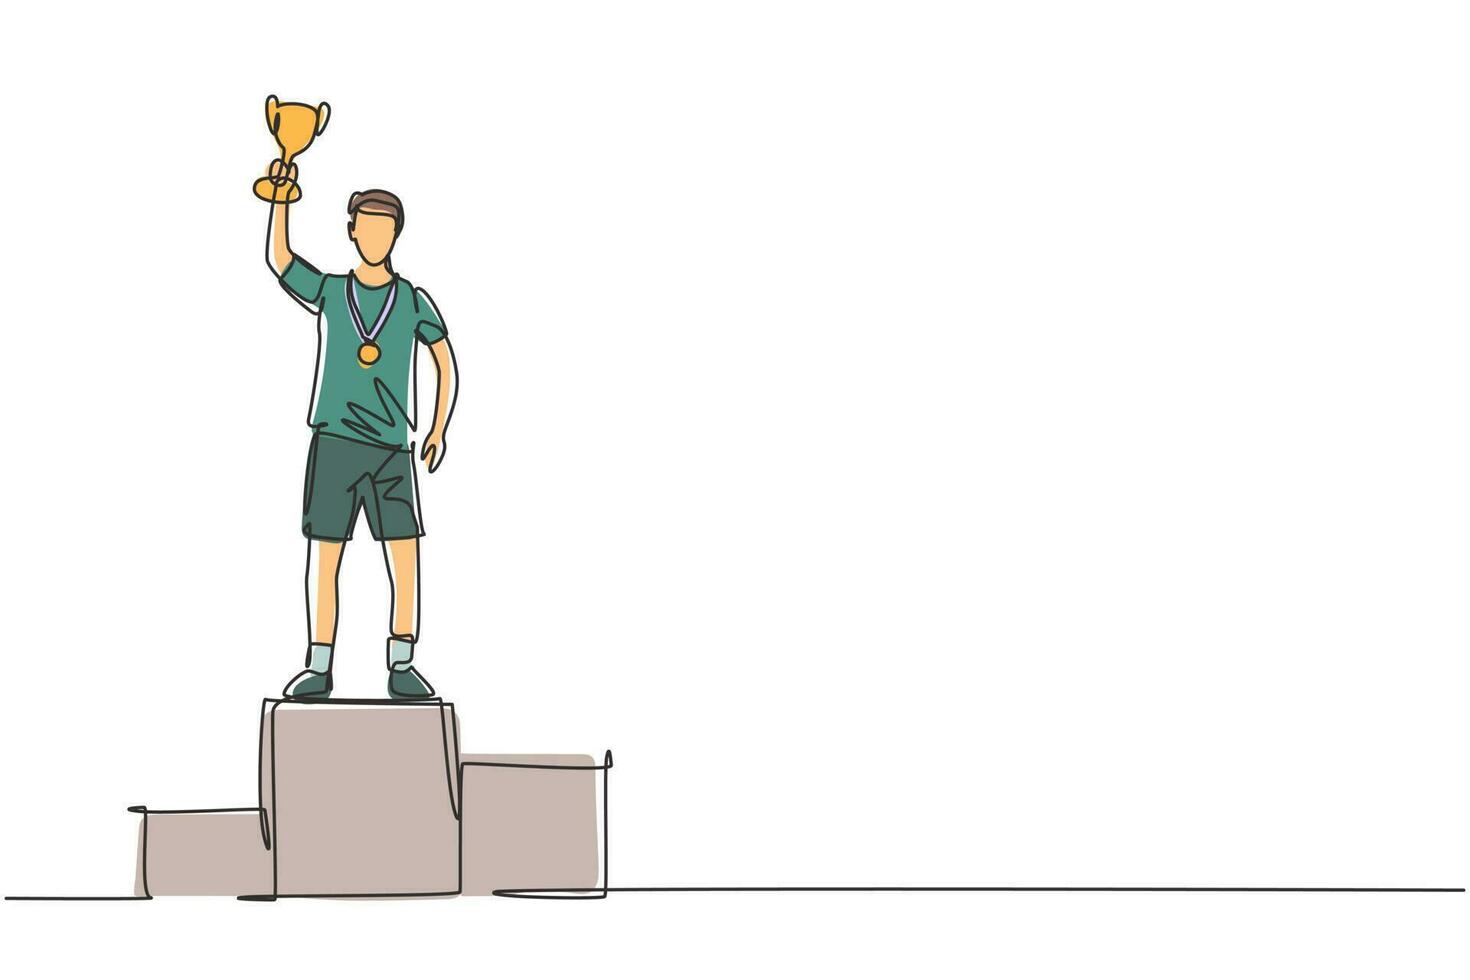 Single continuous line drawing male athlete wearing sports jersey lifting golden trophy with one hand on podium. Celebrating victory of competition. One line draw graphic design vector illustration